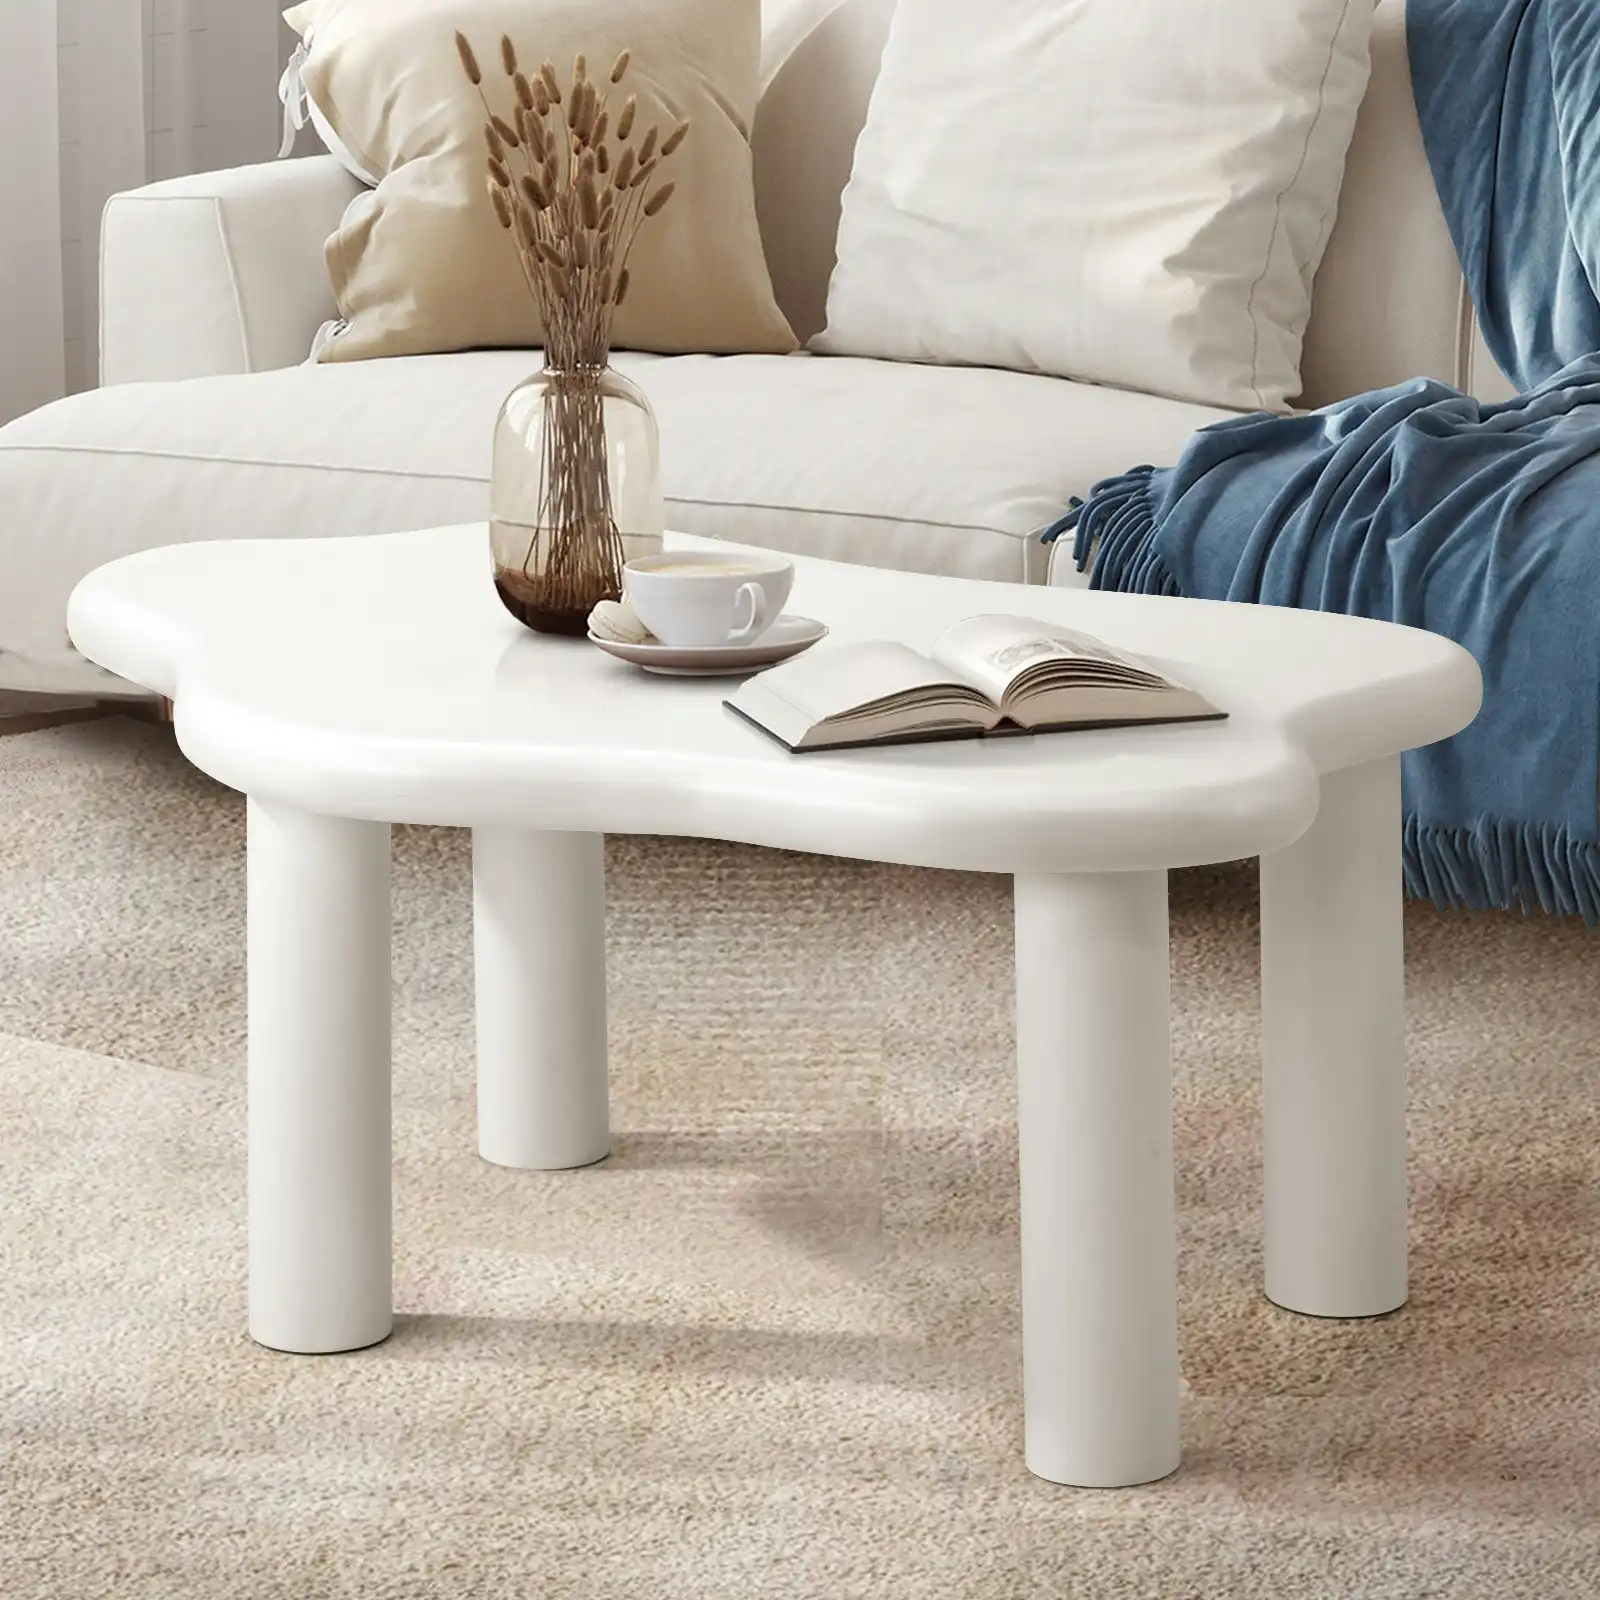 Oikiture Coffee Table Side Tables Sofa Cafe Desk Living Room White Irregular